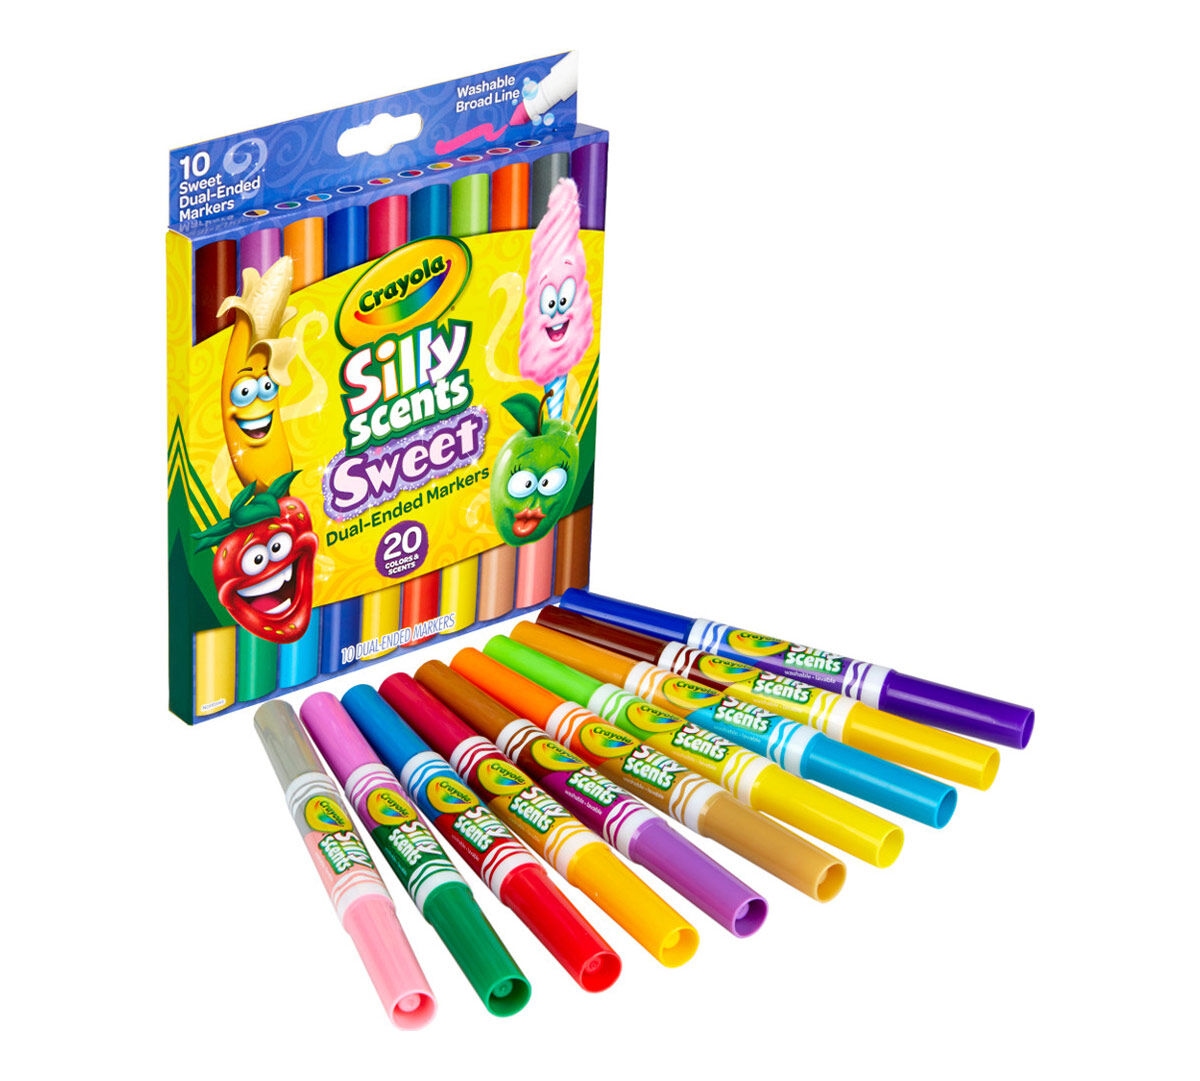 Crayola Silly Scents Dual-Ended Art Markers, School Supplies, Beginner Child, 10 Count - image 4 of 6